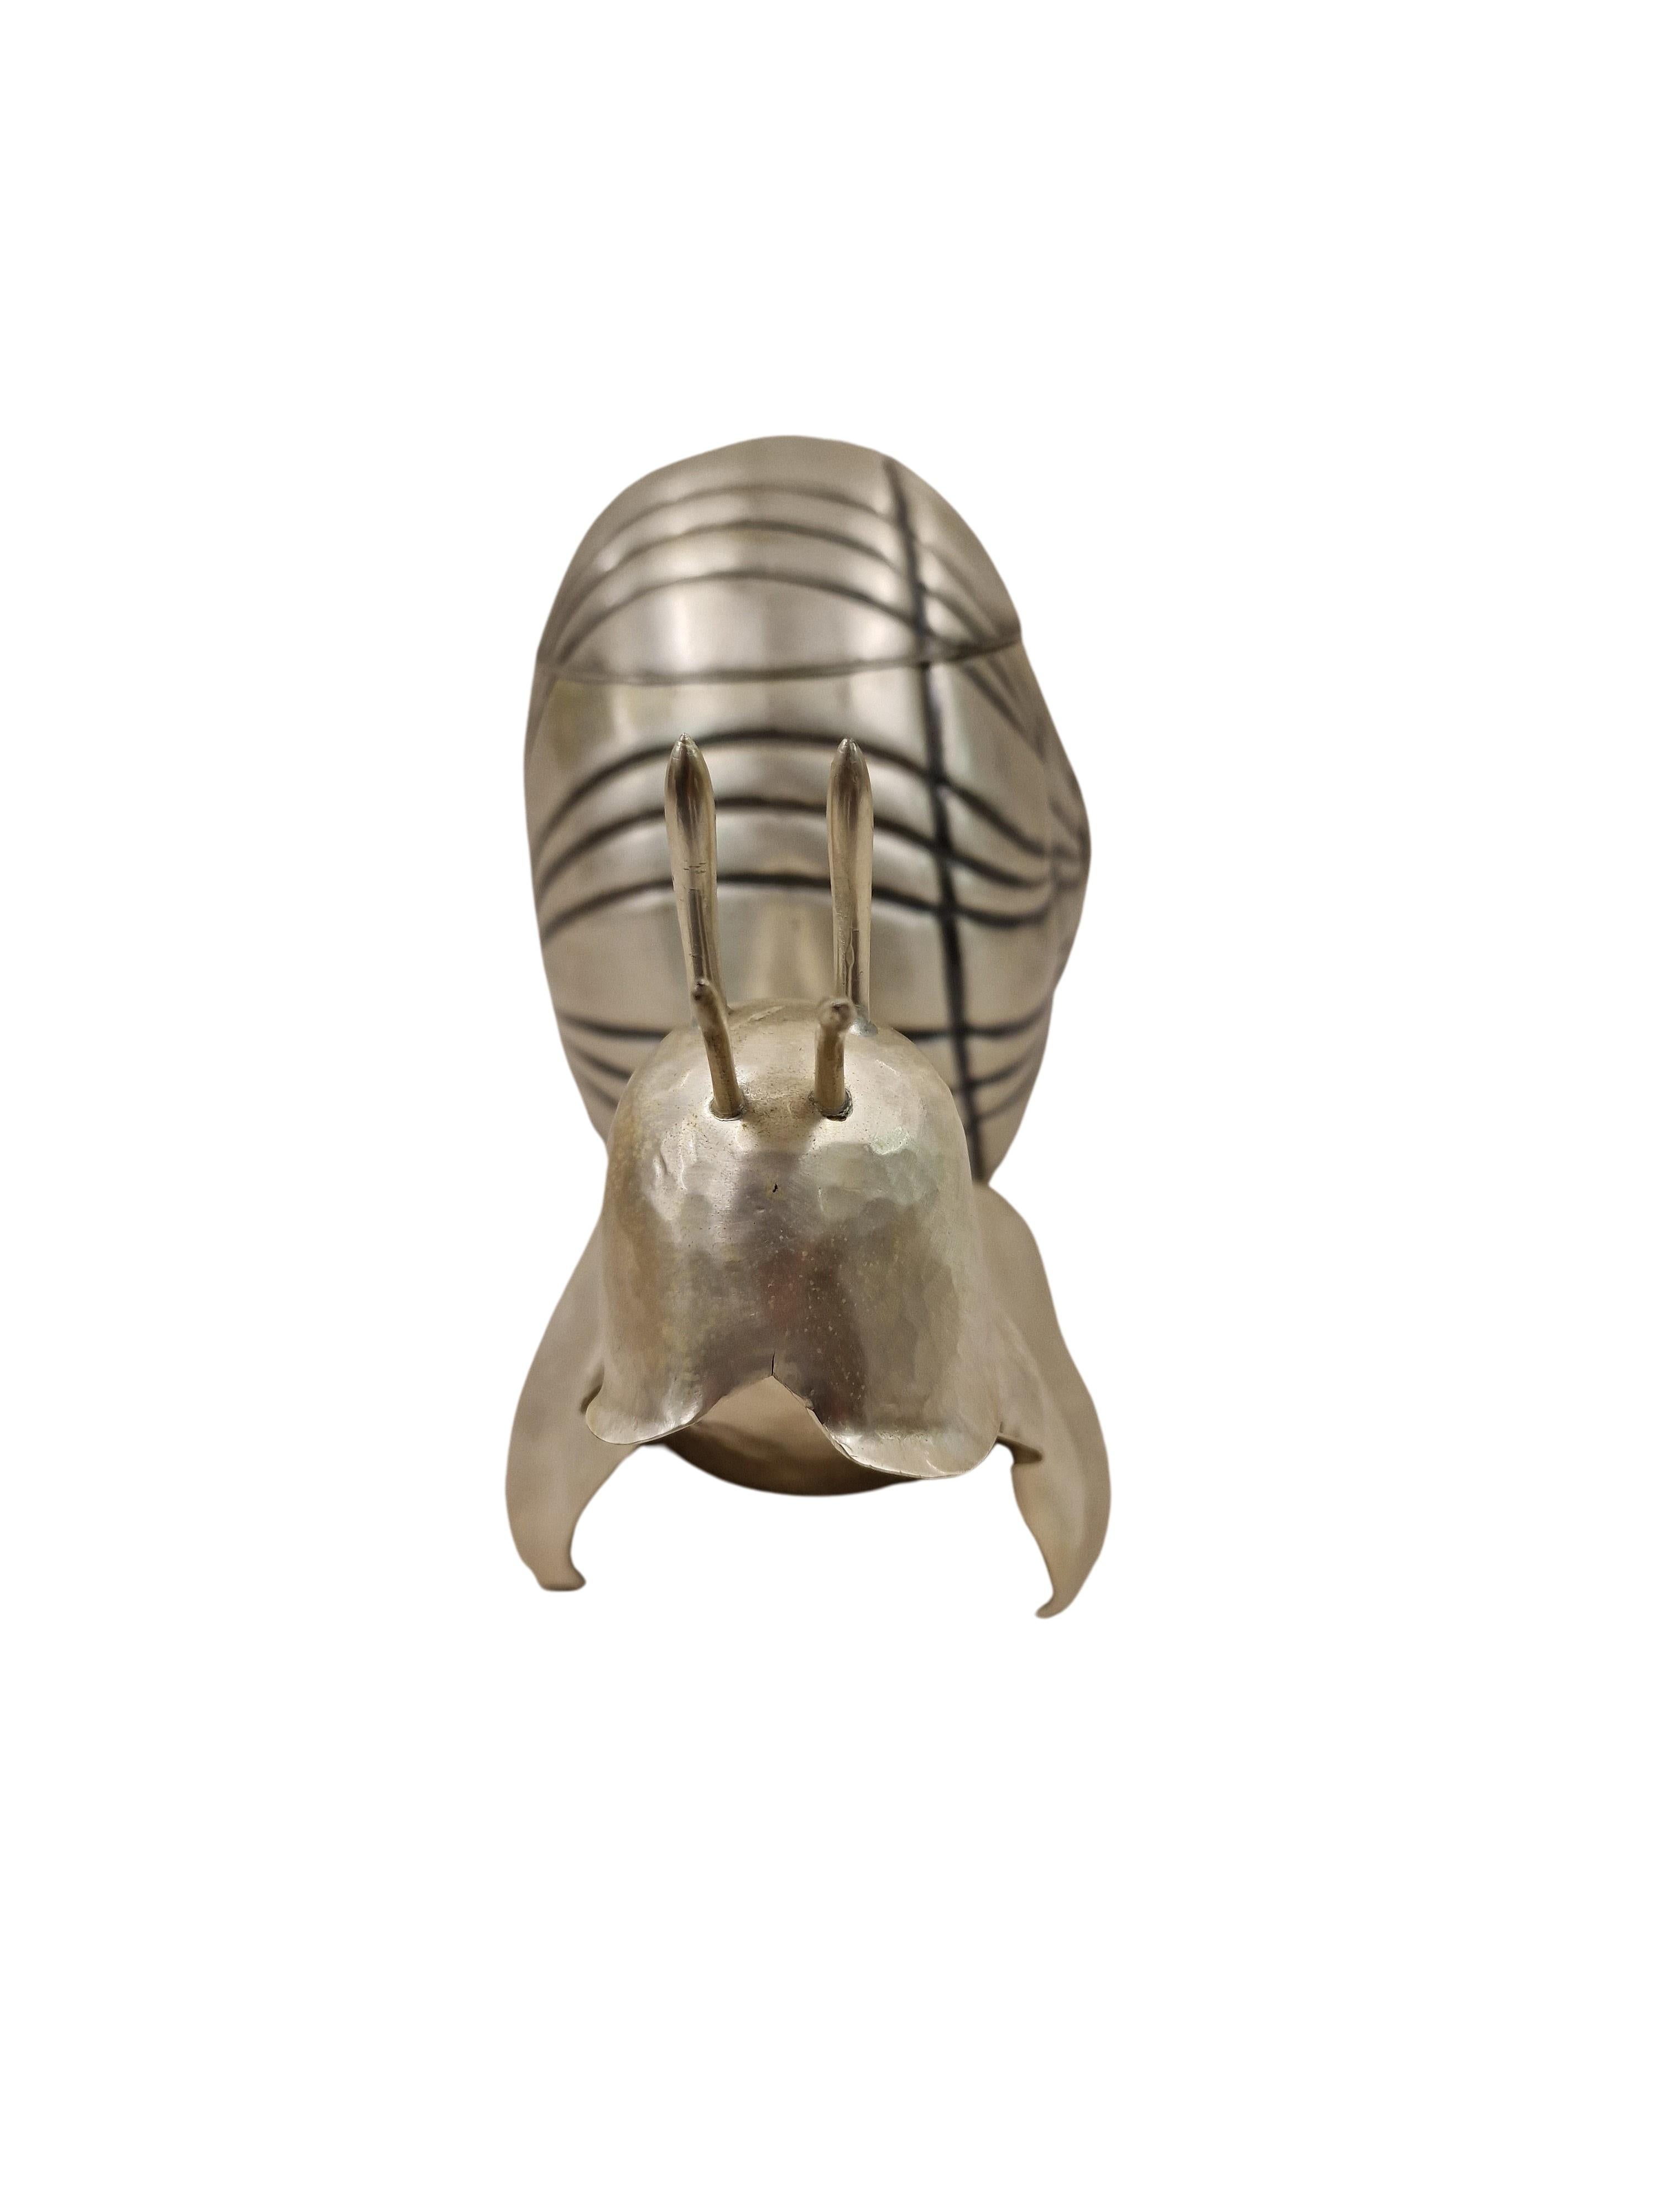 Italian Ice bucket in form of a snail, silver plated, vintage 1960/70 Mid-Century, Italy